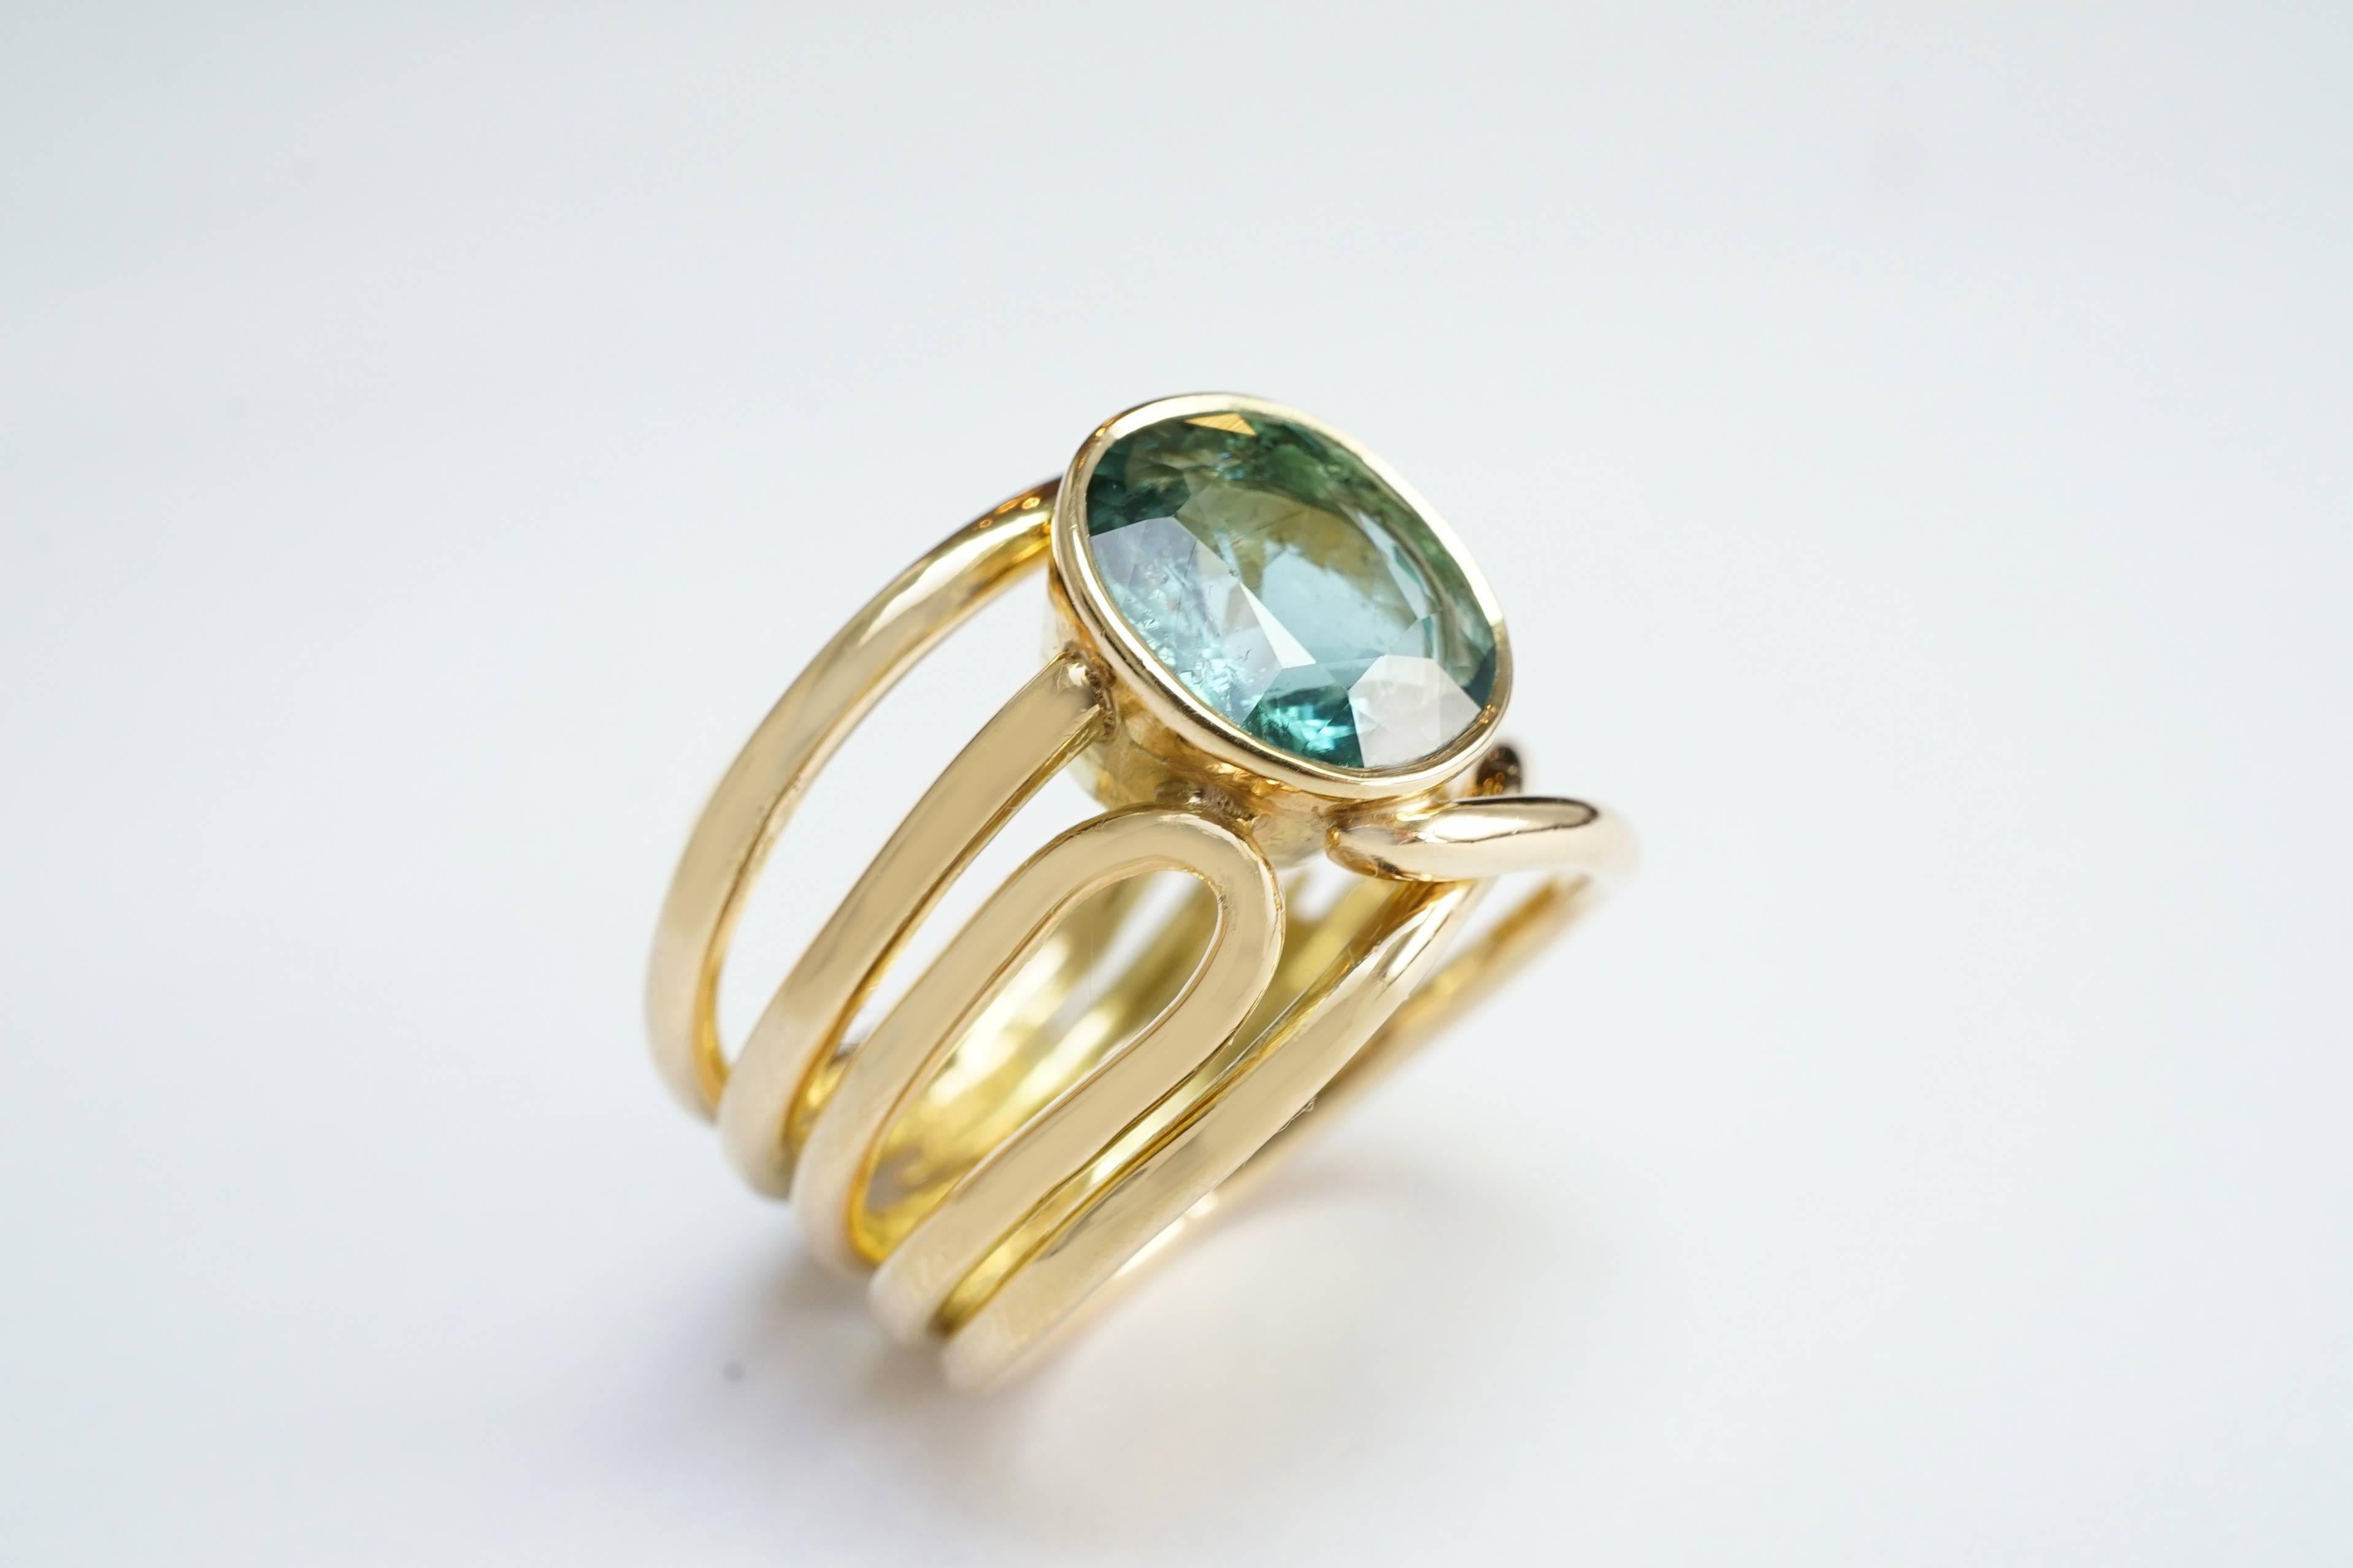 Coralie Van Caloen Gold 18 Carat Band Ring With Turquoise Tourmaline is entirely hand made and forged in Belgium by experts goldsmiths therefore it is a 
very unique piece. The fluidity of cords give the ring a feminine, contemporary and elegant